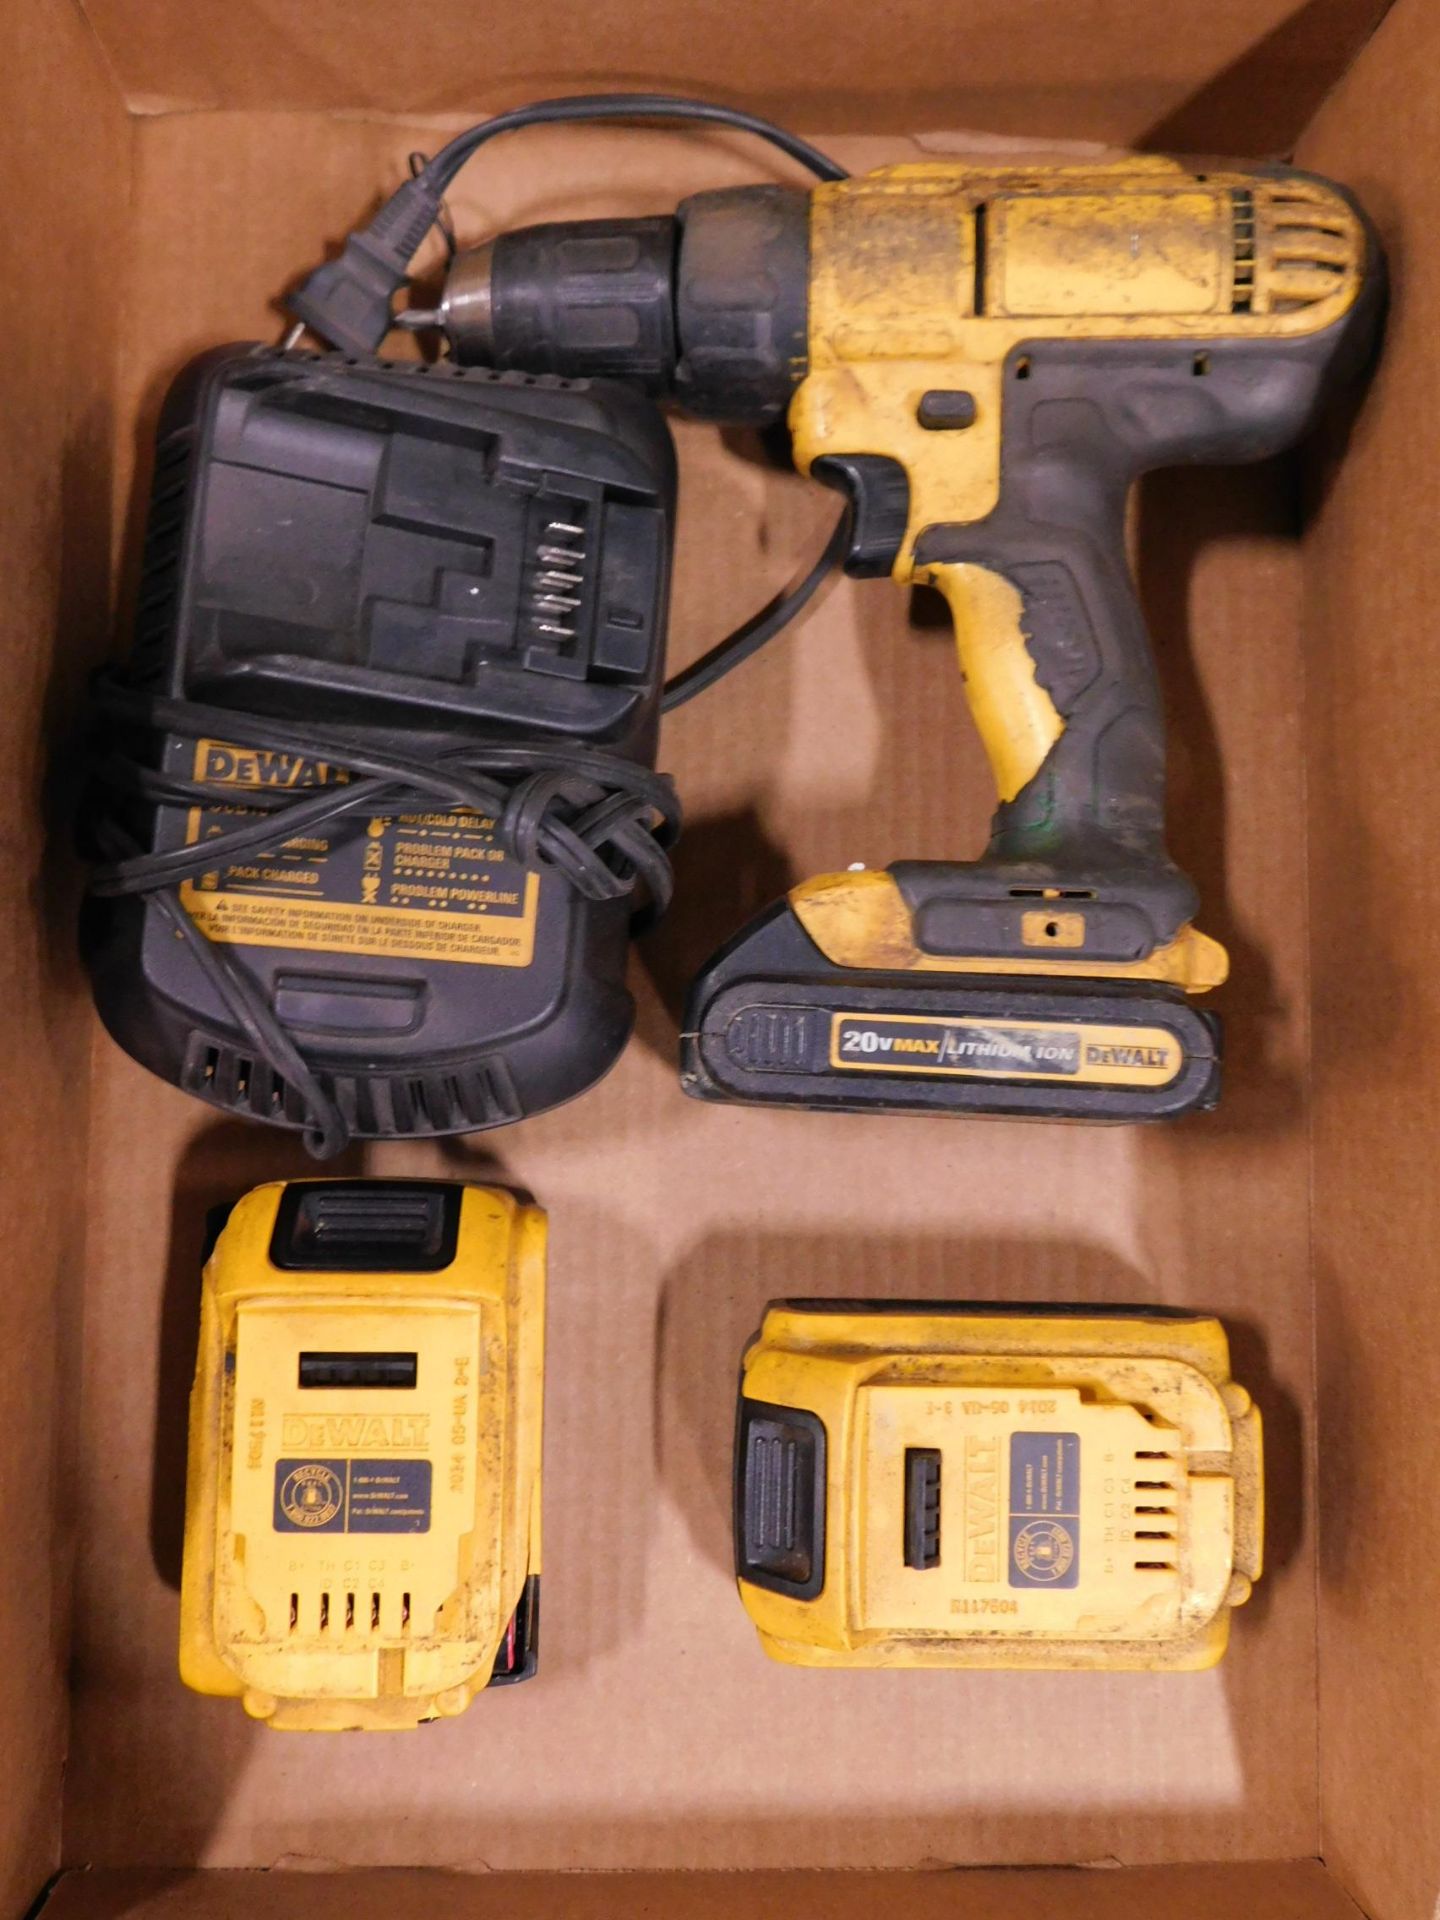 Dewalt 20V Cordless Drill with Batteries and Charger